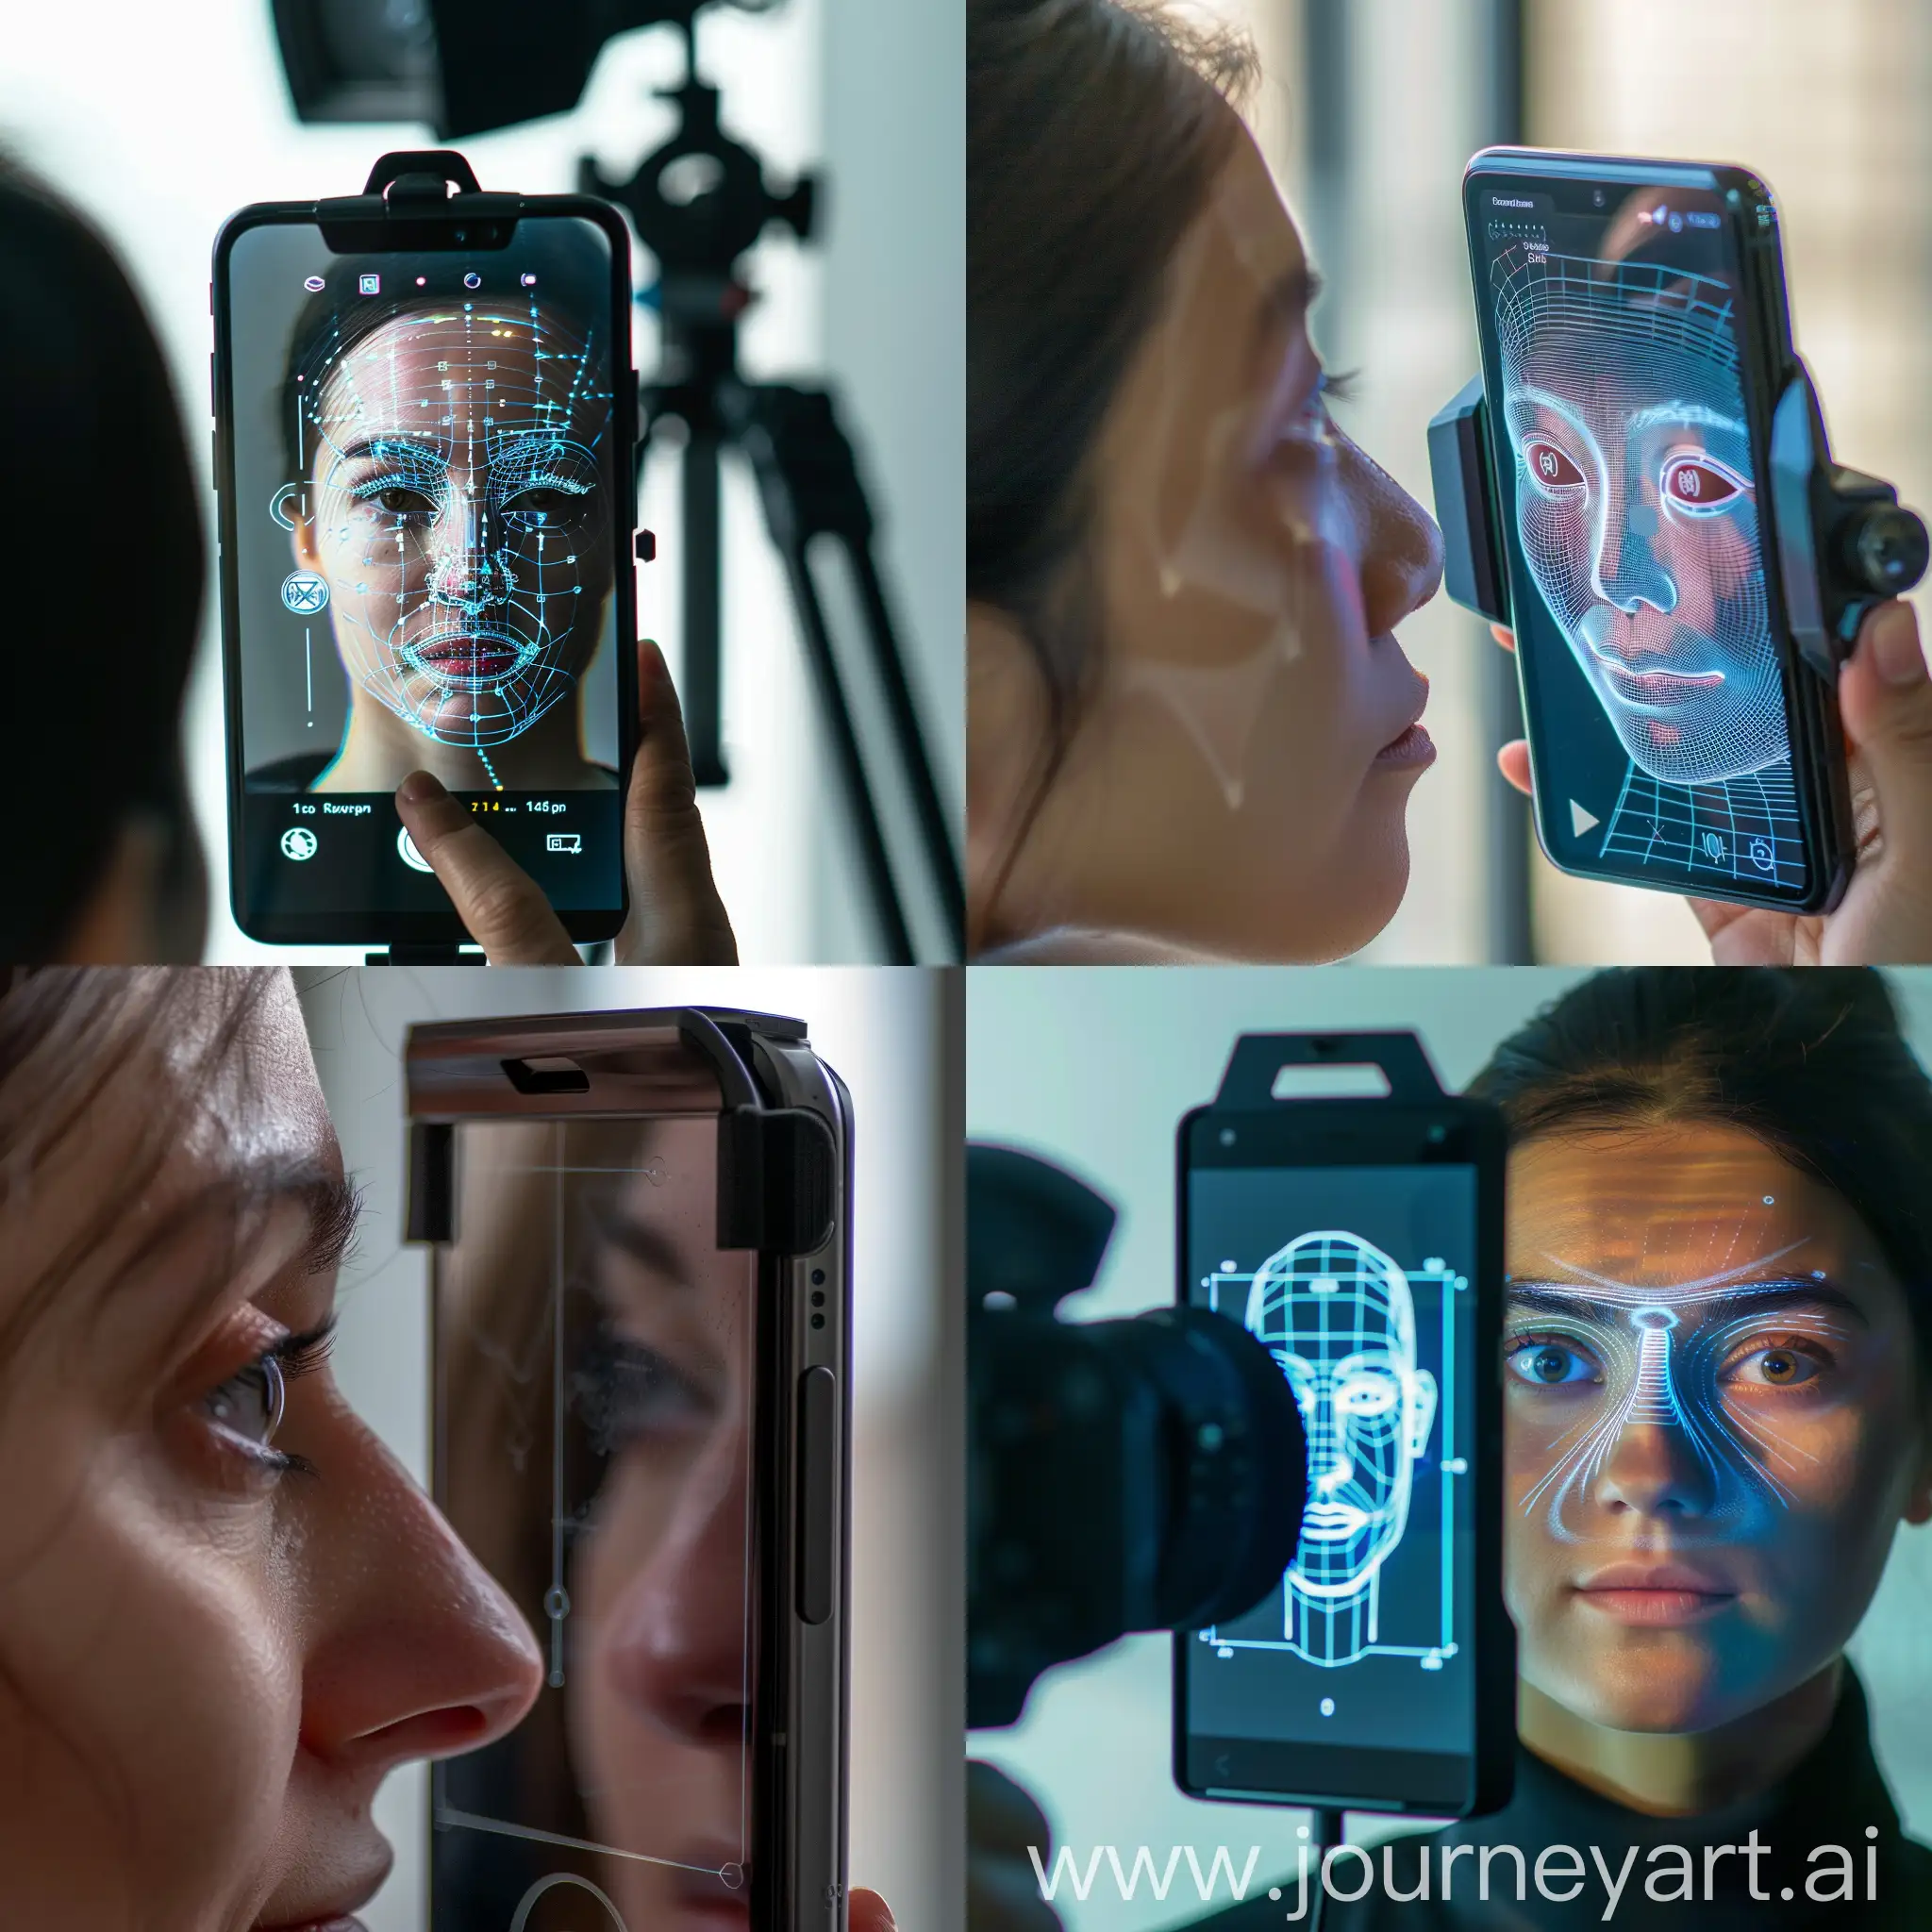 a person's face scanning on smartphone, face of the person, smartphone facing the person, camera angle behind smartphone, hd